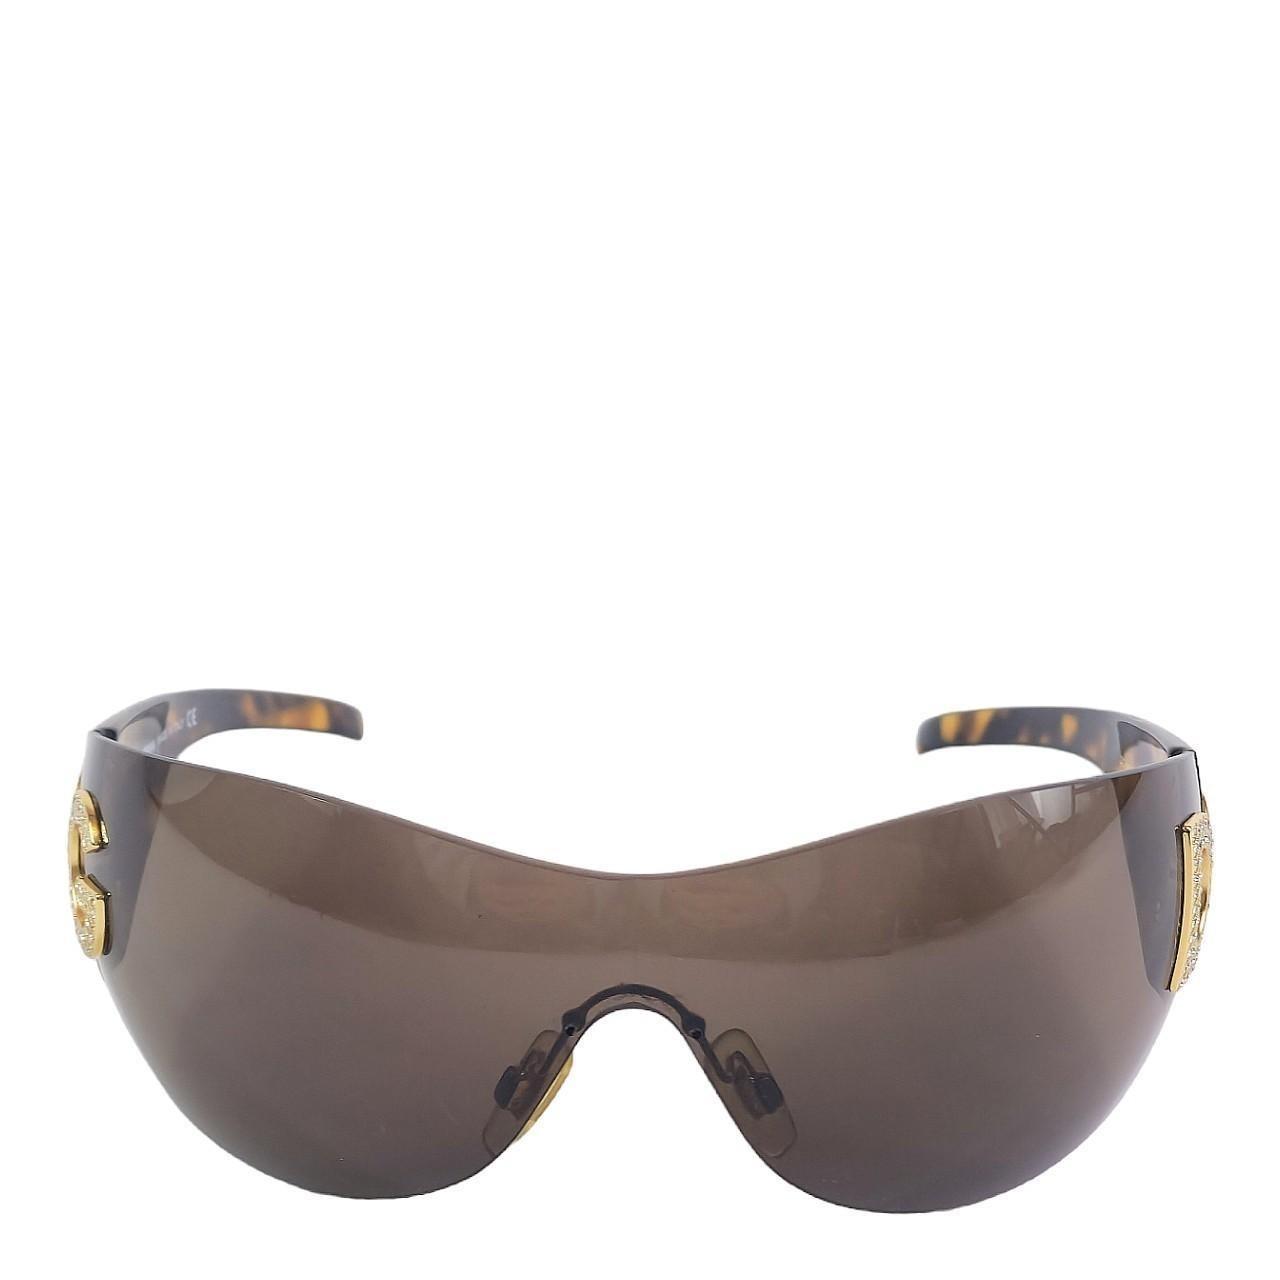 Dolce & Gabbana Men's Brown and Gold Sunglasses - 6